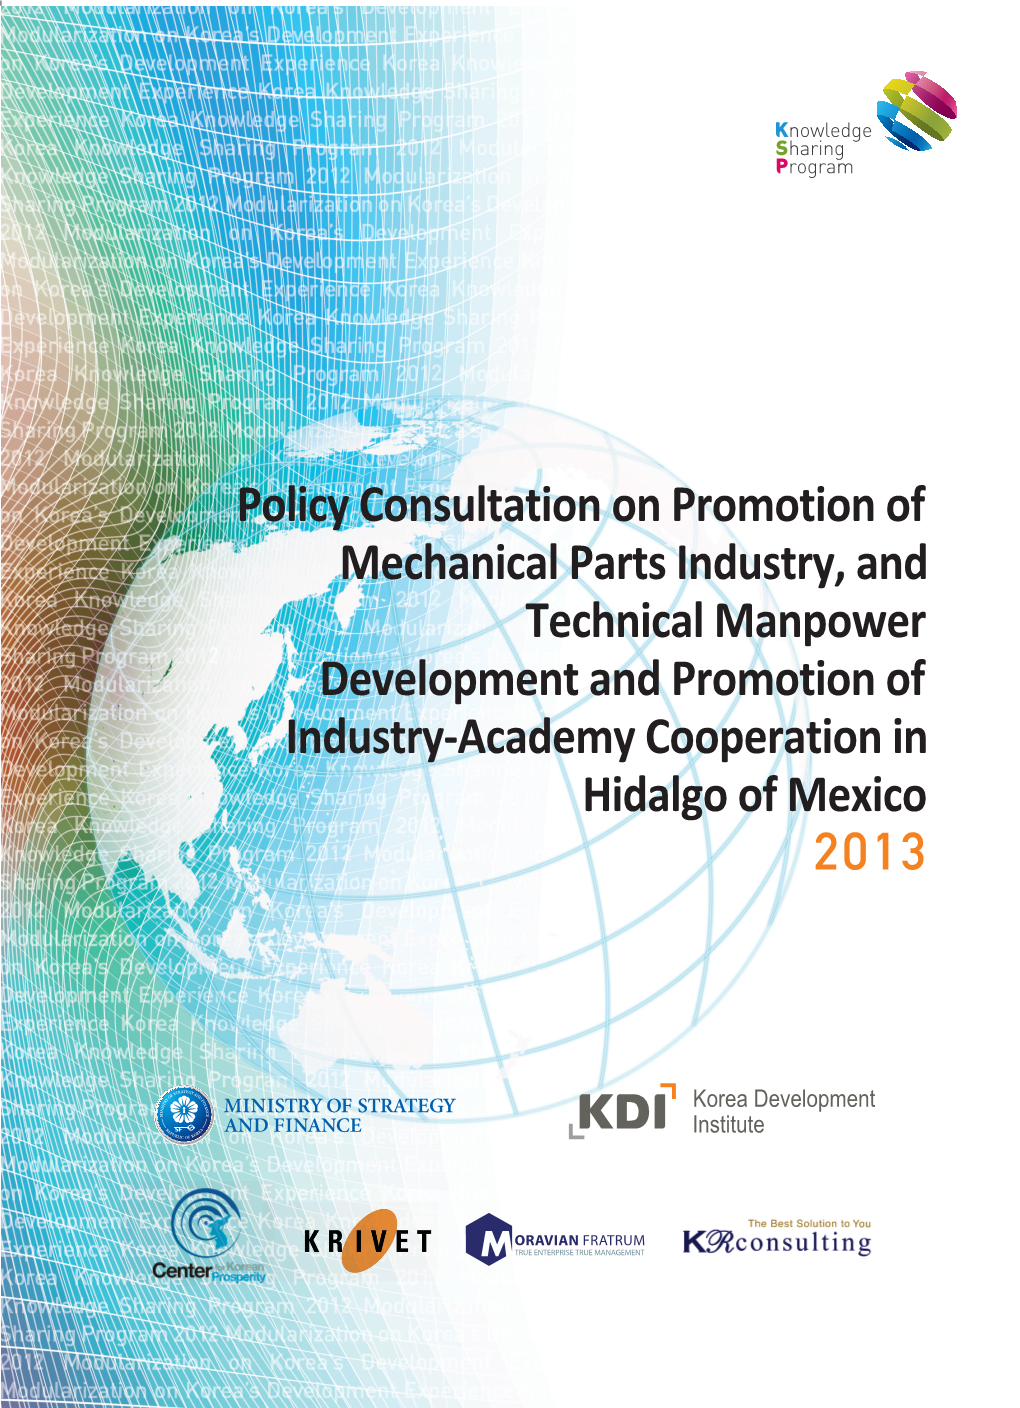 Policy Consultation on Promotion of Mechanical Parts Industry, And